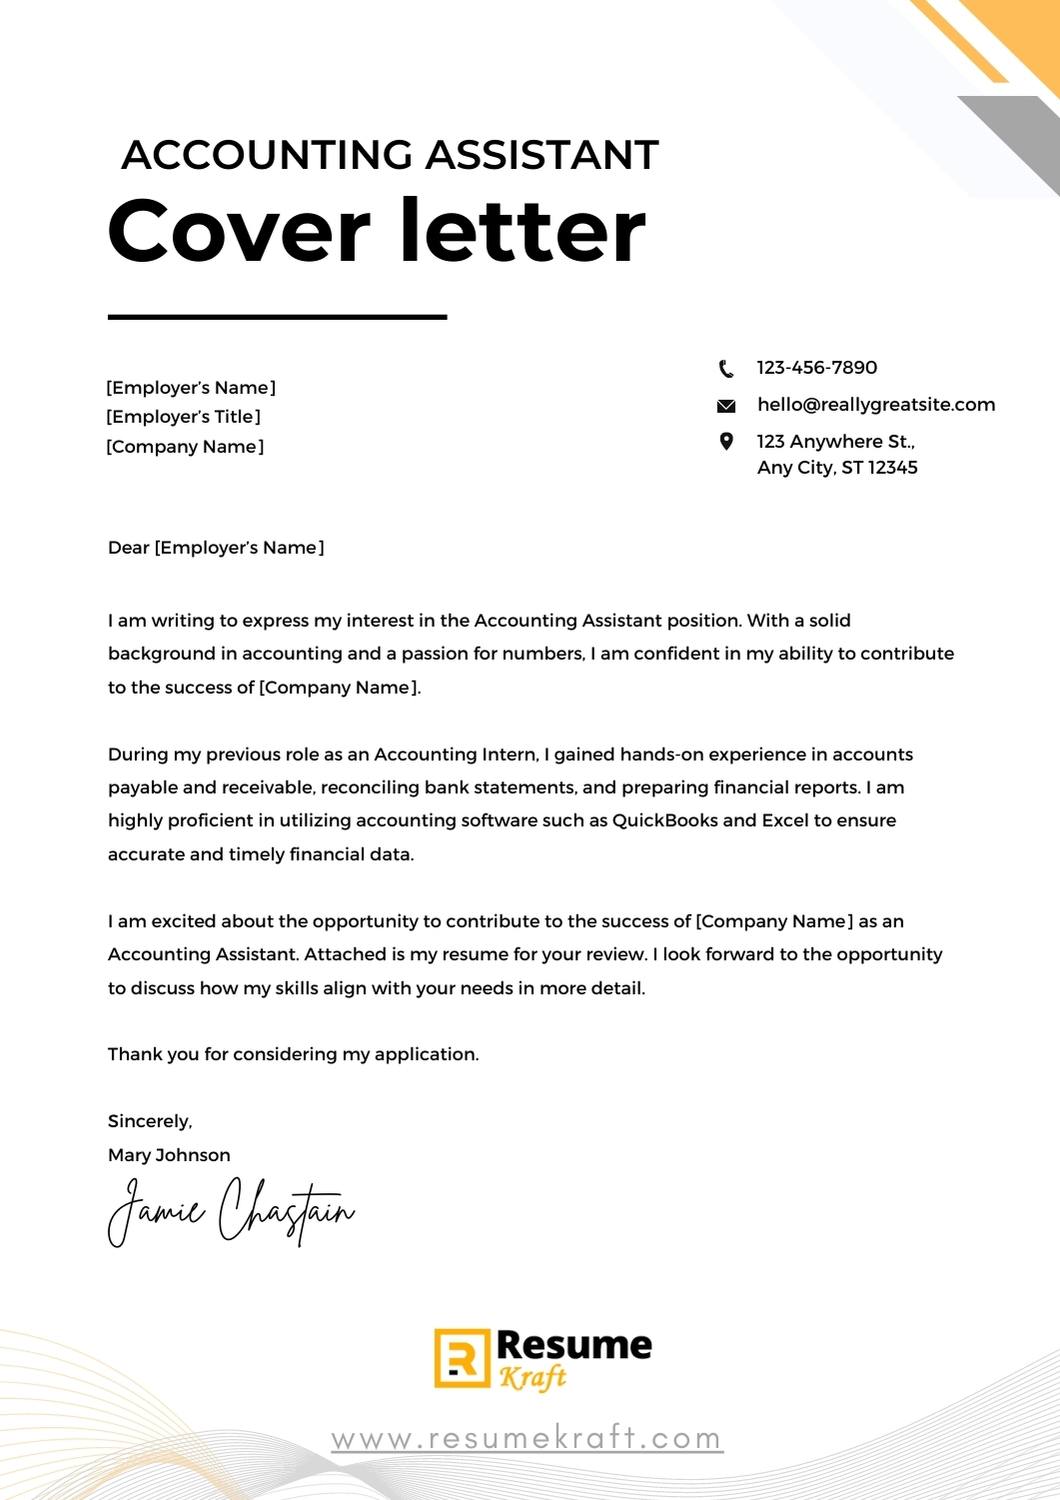 sample cover letter for accounting assistant with no experience